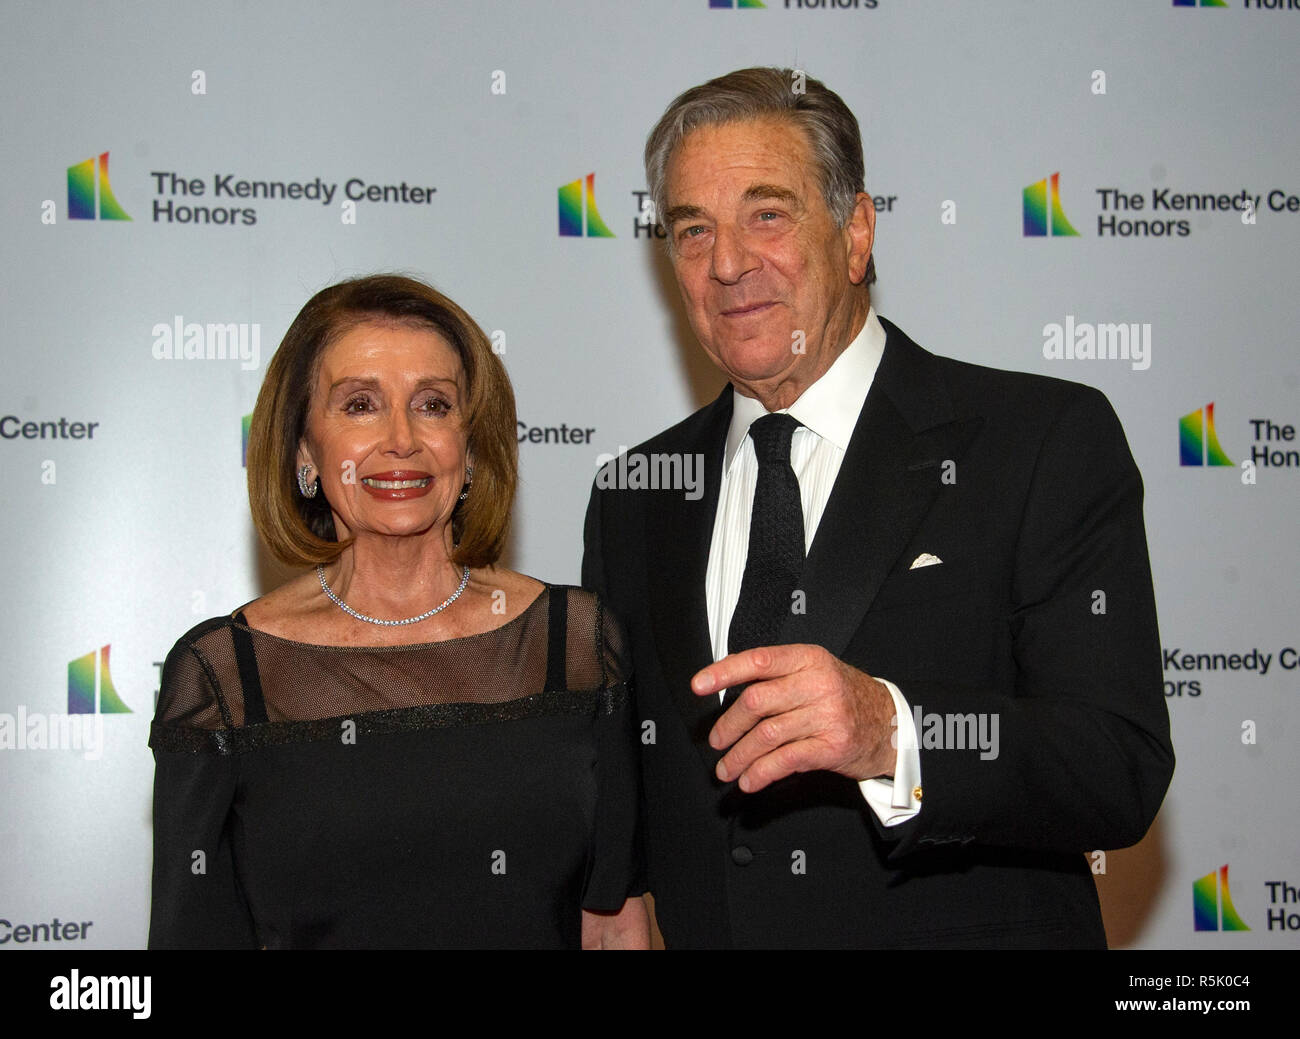 Washington DC, USA. 1st XDecember, 2018. United States House Minority Leader Nancy Pelosi (Democrat of California) and her husband, Paul, arrive for the formal Artist's Dinner honoring the recipients of the 41st Annual Kennedy Center Honors hosted by United States Deputy Secretary of State John J. Sullivan at the US Department of State in Washington, DC on Saturday, December 1, 2018. The 2018 honorees are: singer and actress Cher; composer and pianist Philip Glass; Country music entertainer Reba McEntire; and jazz saxophonist and composer Wayne Shorter. Credit: MediaPunch Inc/Alamy Live News Stock Photo